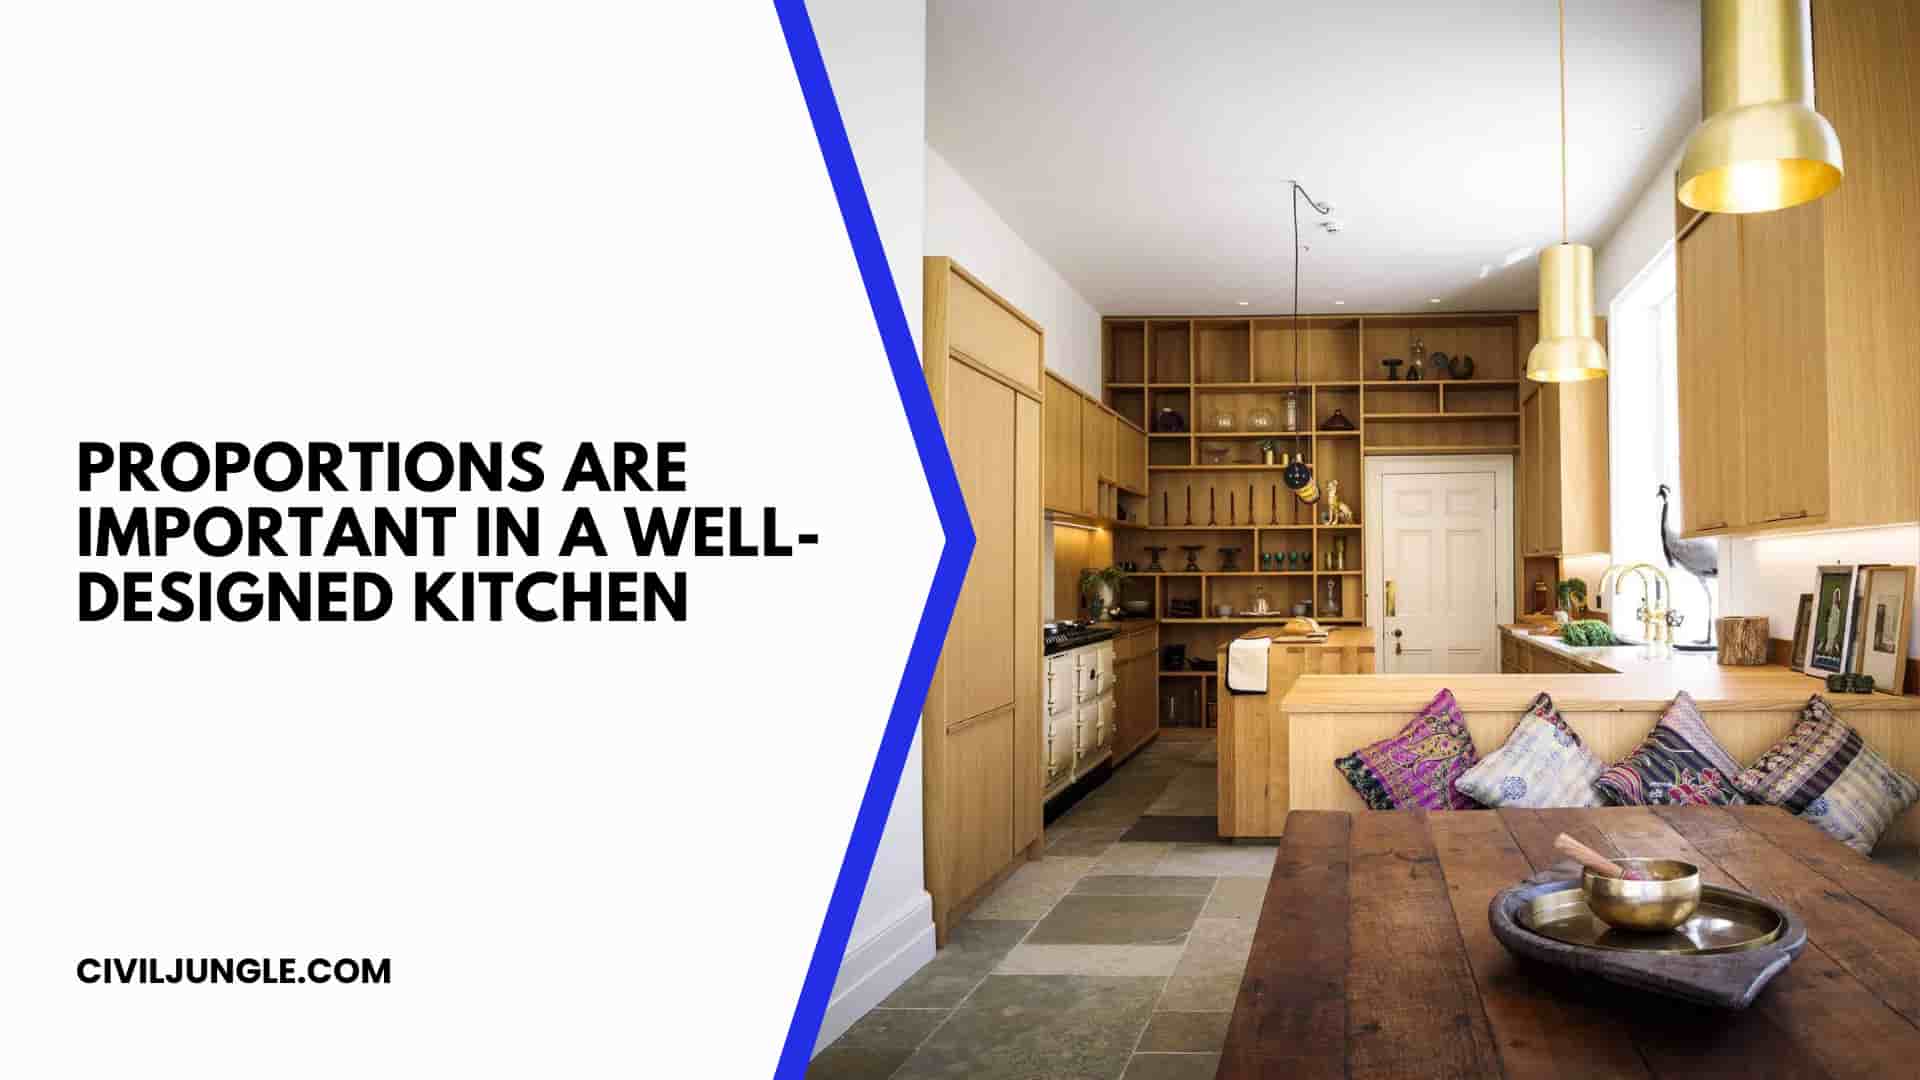 Proportions Are Important in a Well-Designed Kitchen